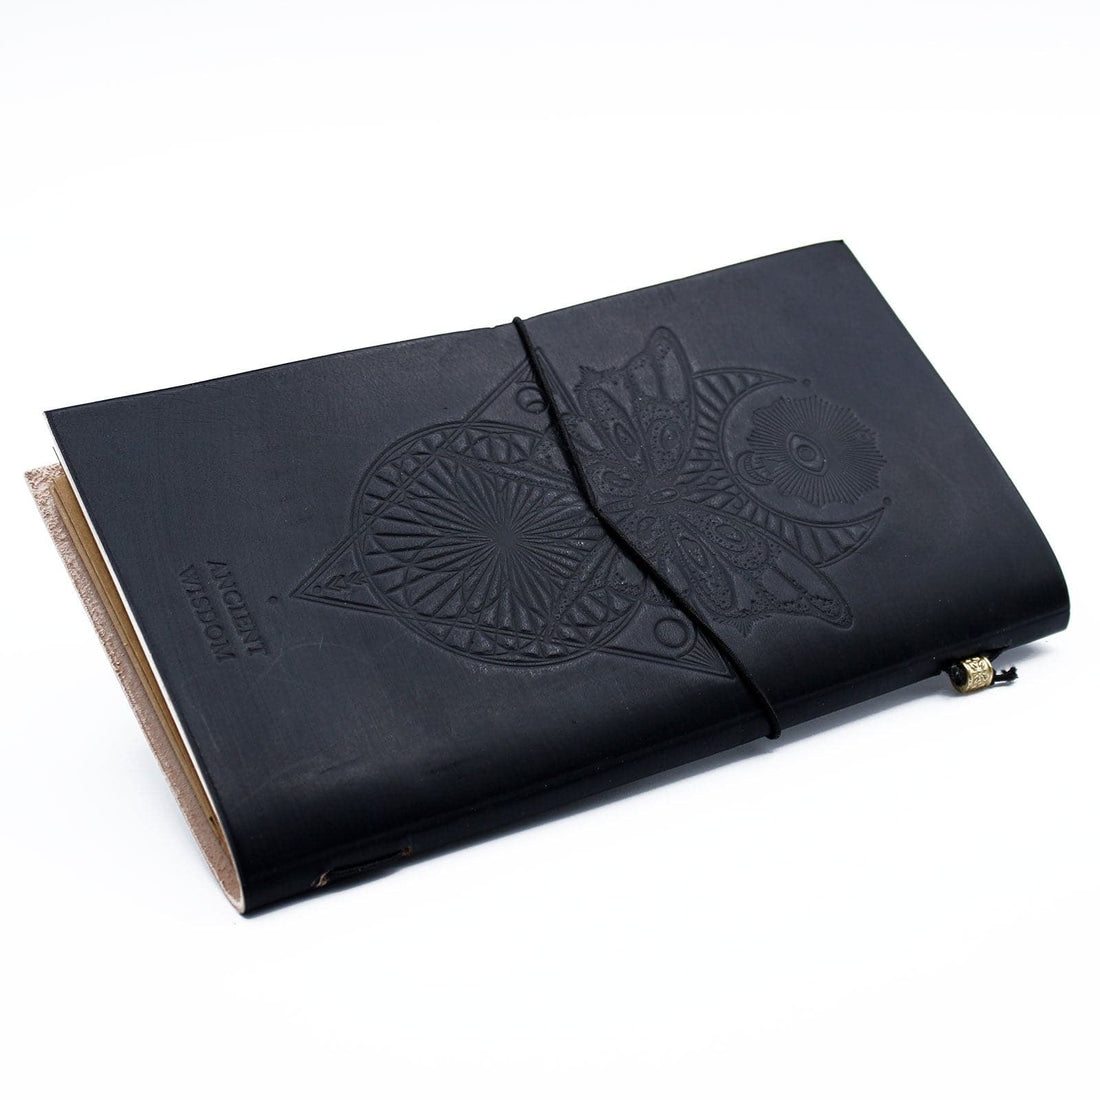 Handmade Leather Journal - My Book of Spells and other Thoughts - Black - best price from Maltashopper.com MSJ-13